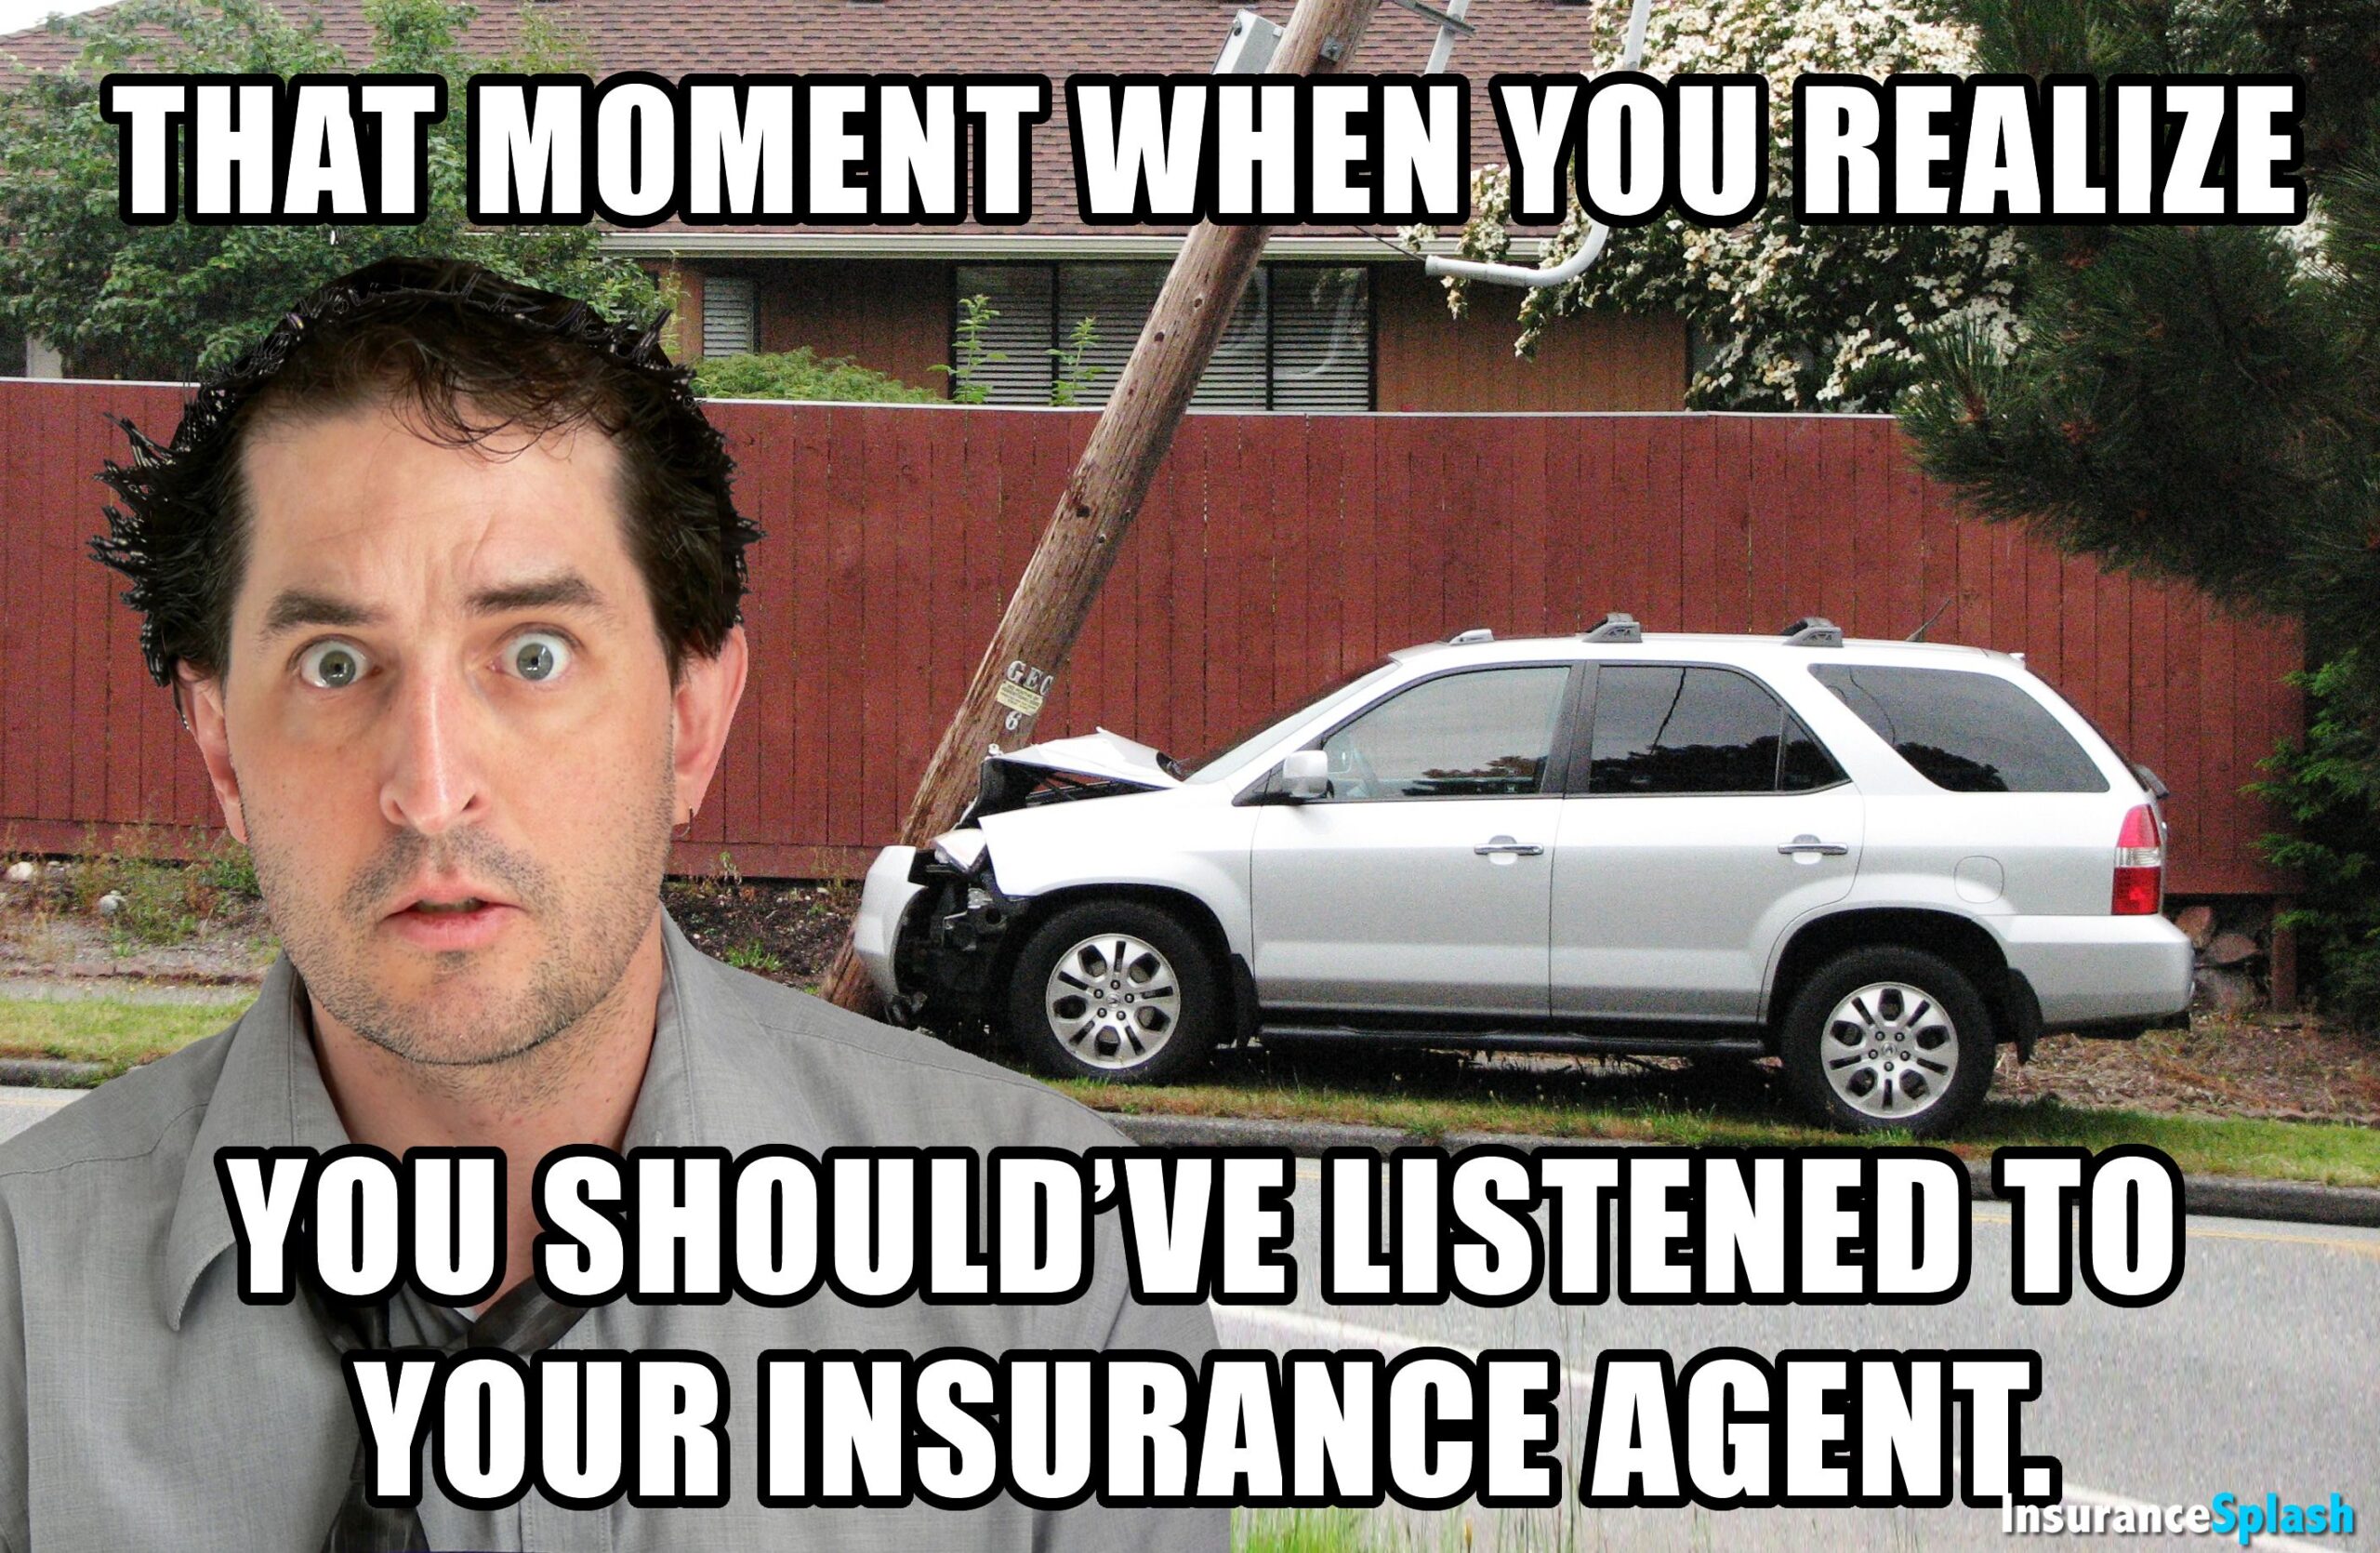 40+ Car Insurance Memes to Check out Now [Must Read]9 min read